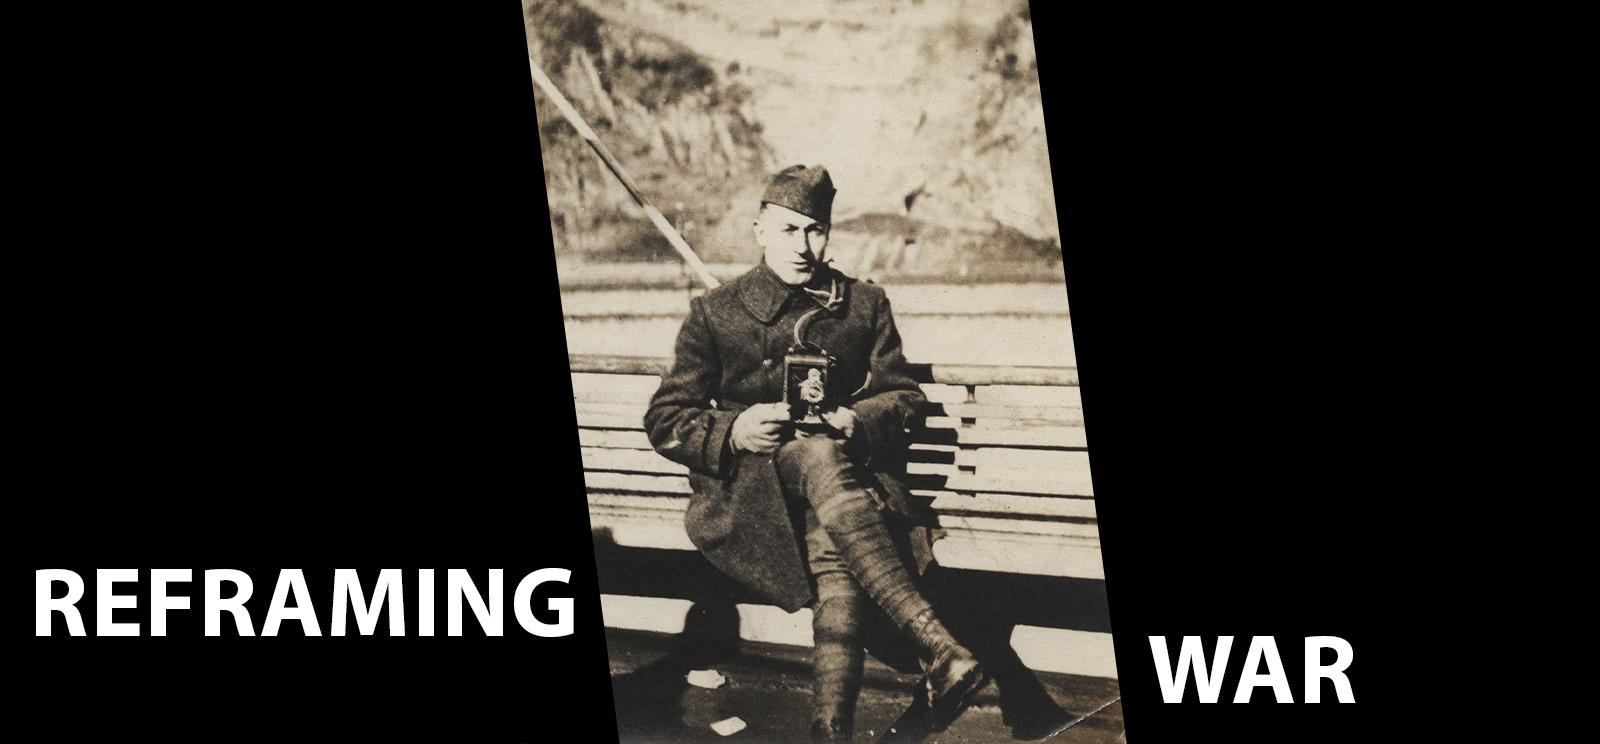 Image: Black and white photograph of a man in military uniform sitting down on a bench. He holds a WWI-era personal camera in his lap, aimed at the viewer. Text: Reframing War